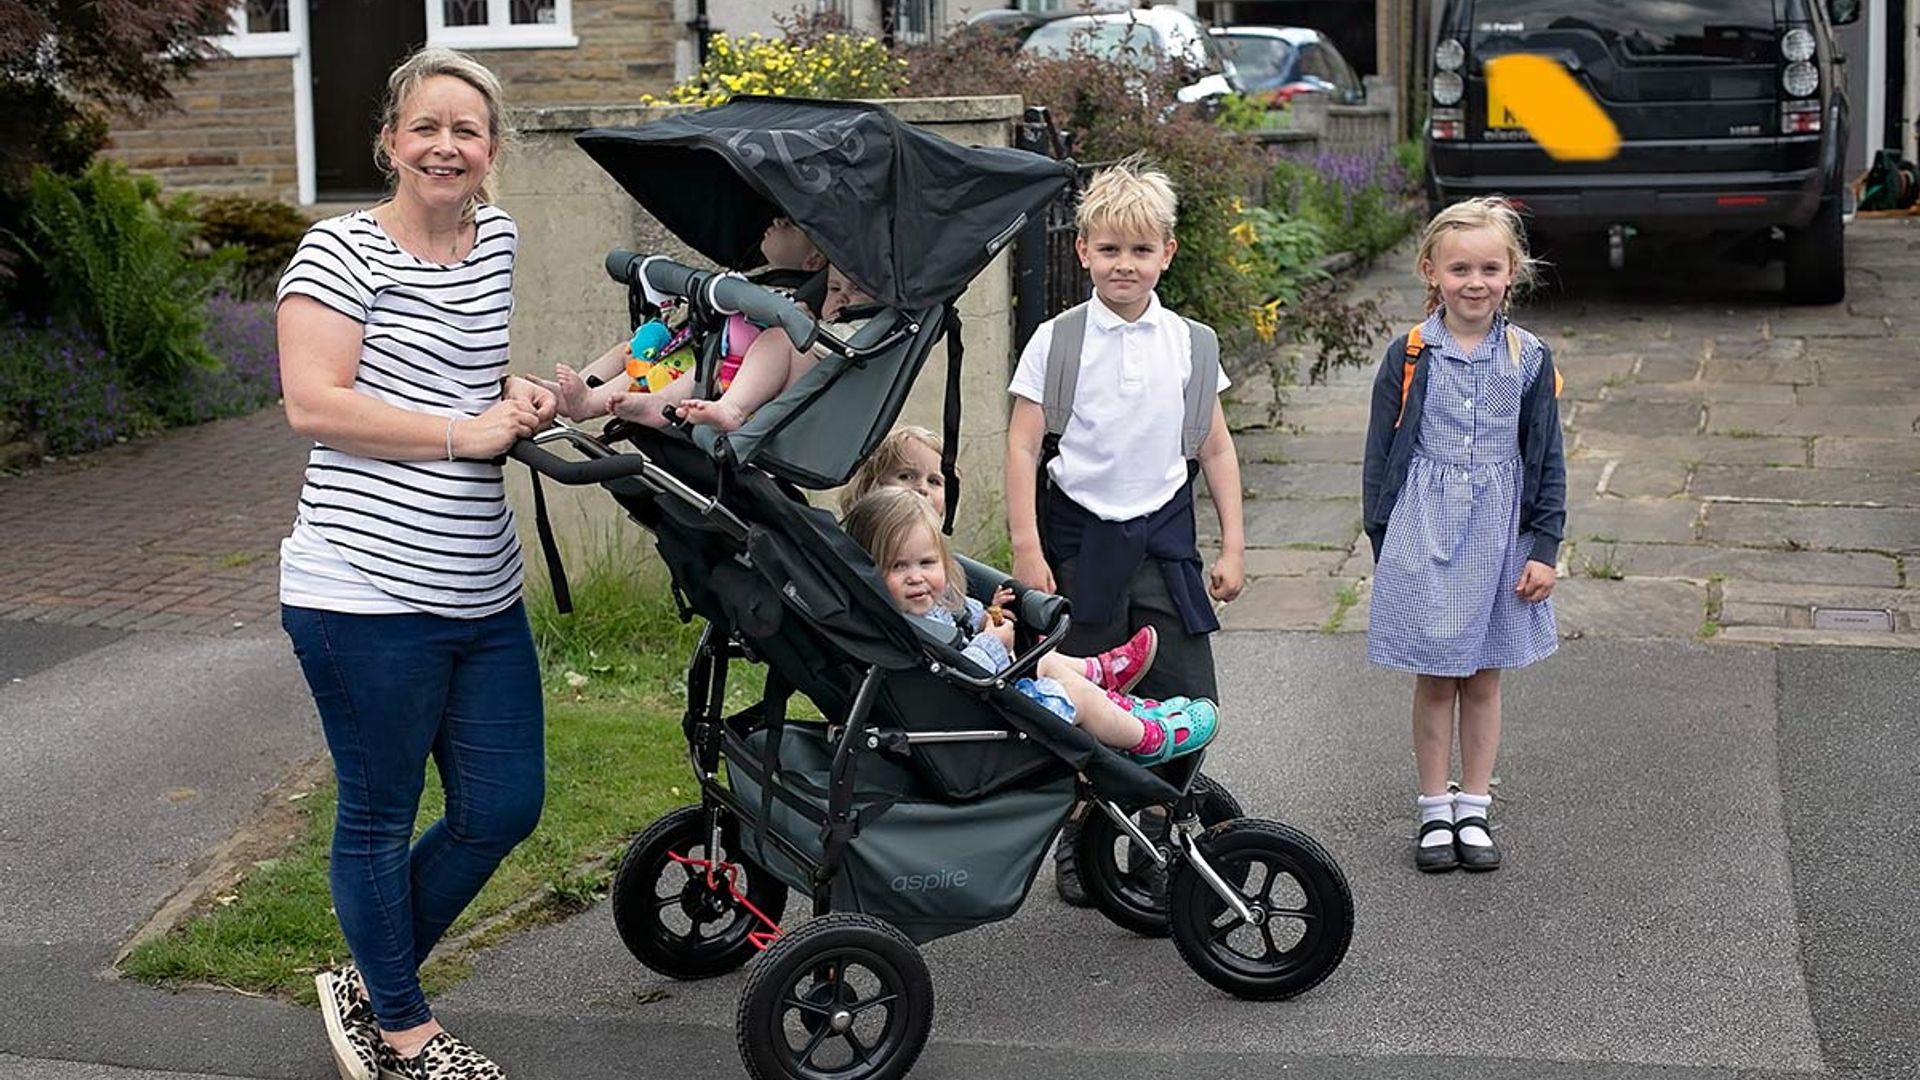 'I have six kids including two sets of twins 20 months apart – this is my life'